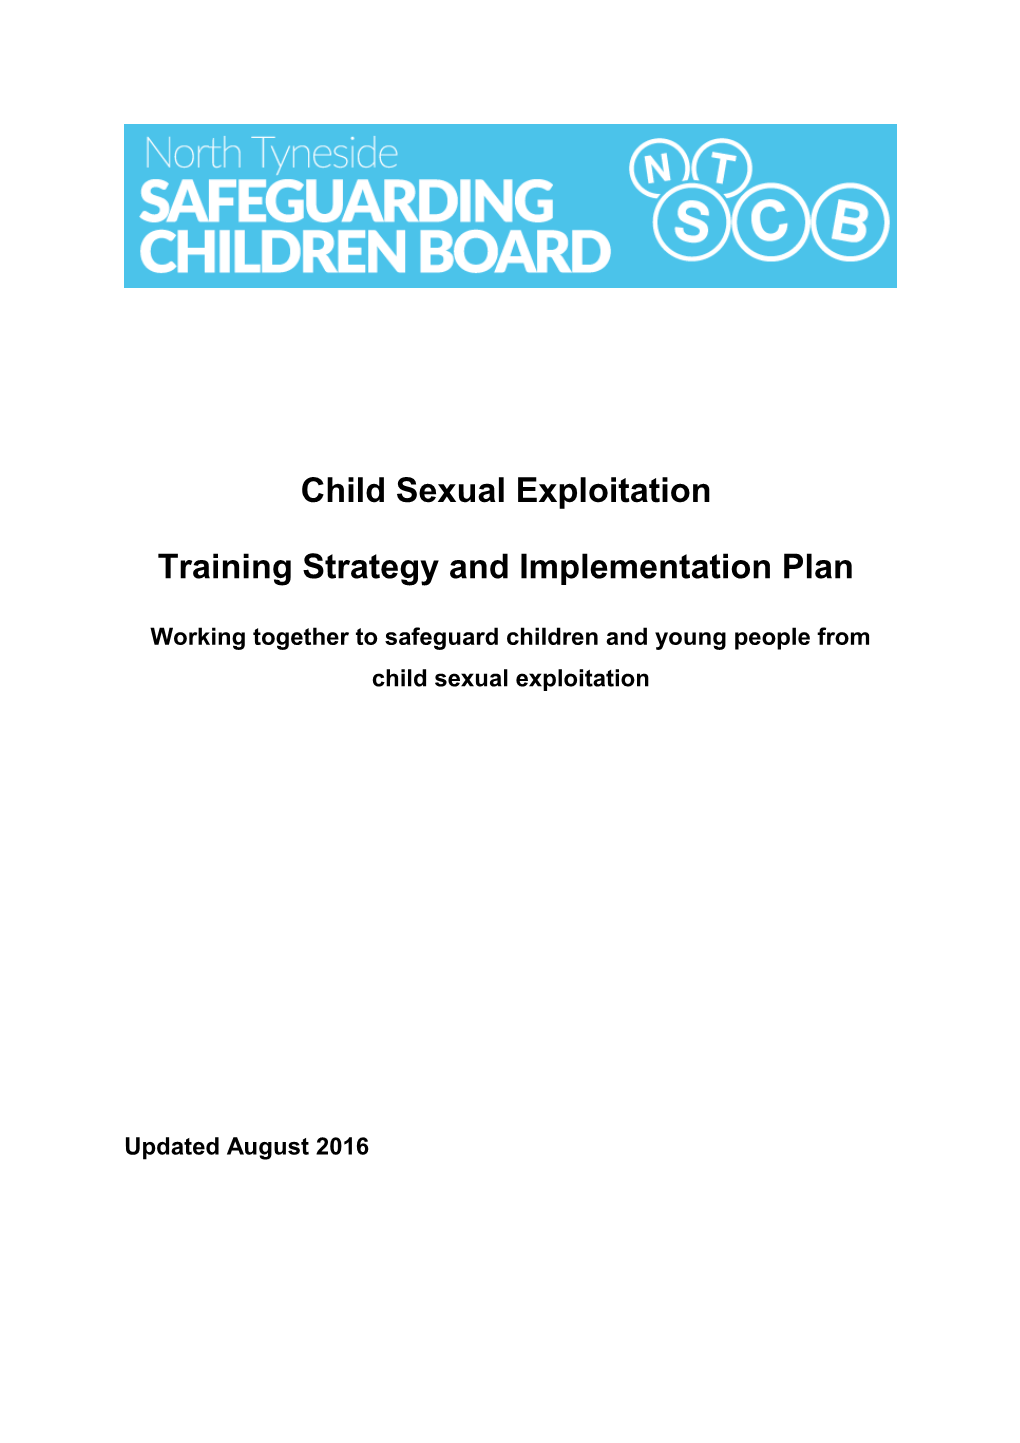 Training Strategy and Implementation Plan